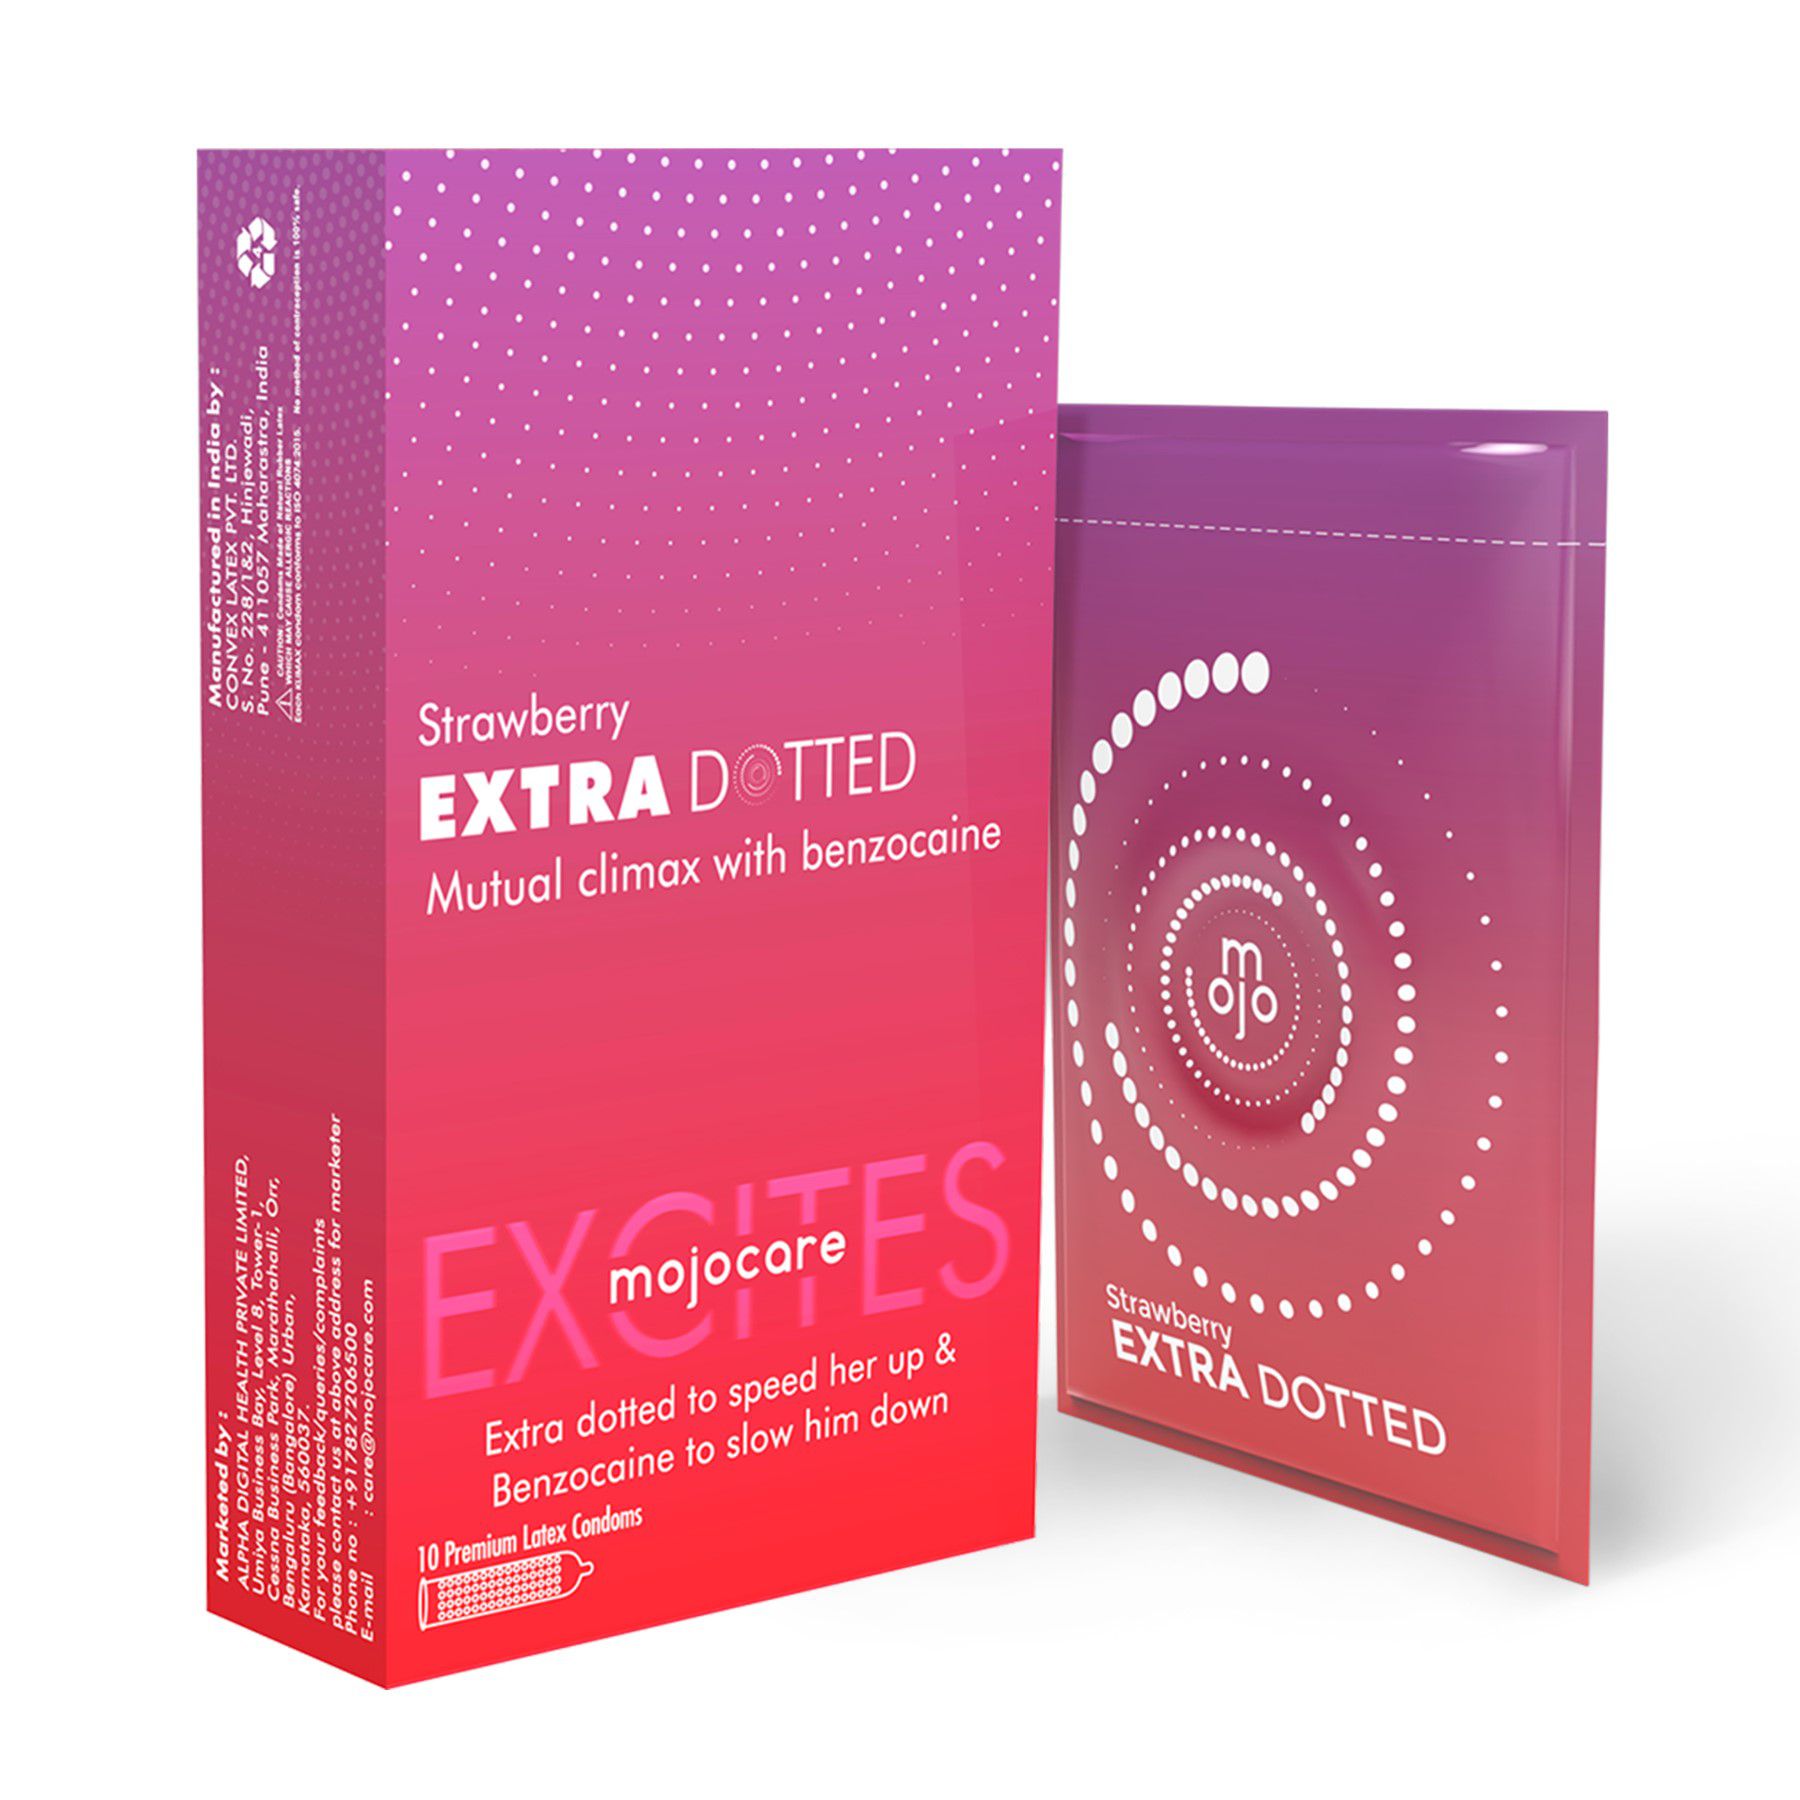 Mojocare Excites - Strawberry Extra Dotted Condoms - Pack of 10, Strawberry Flavored Condoms for Men